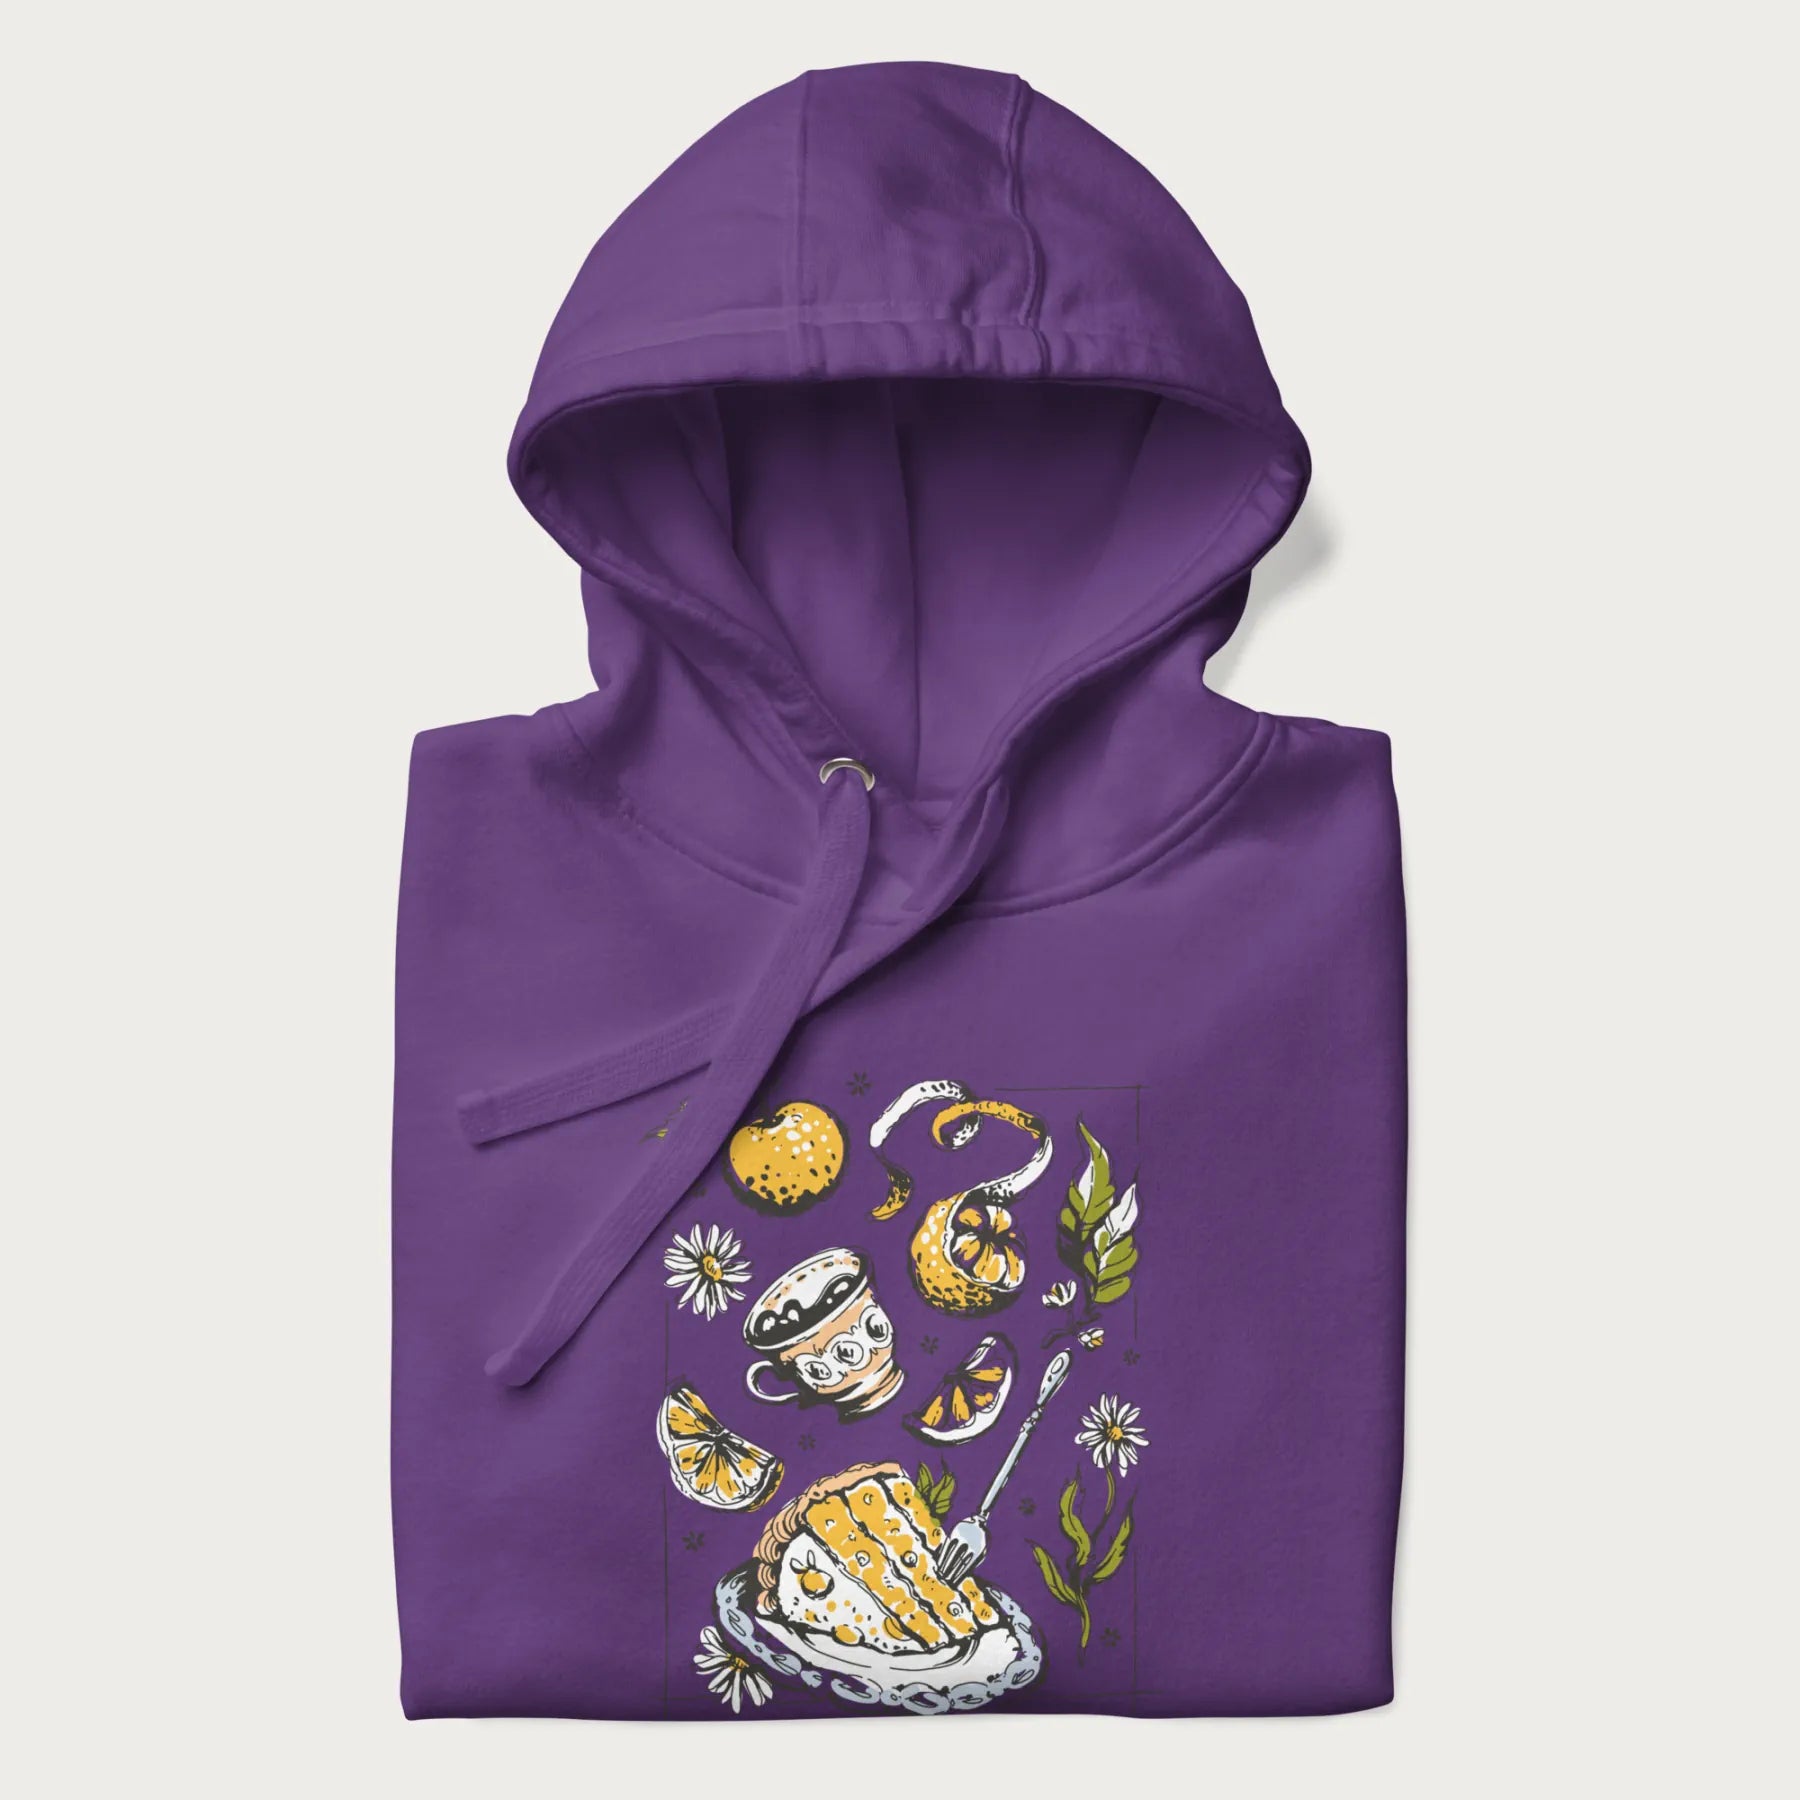 Folded purple hoodie featuring a Cottagecore-themed graphic with oranges, a floral porcelain cup, orange pie, and daisies.